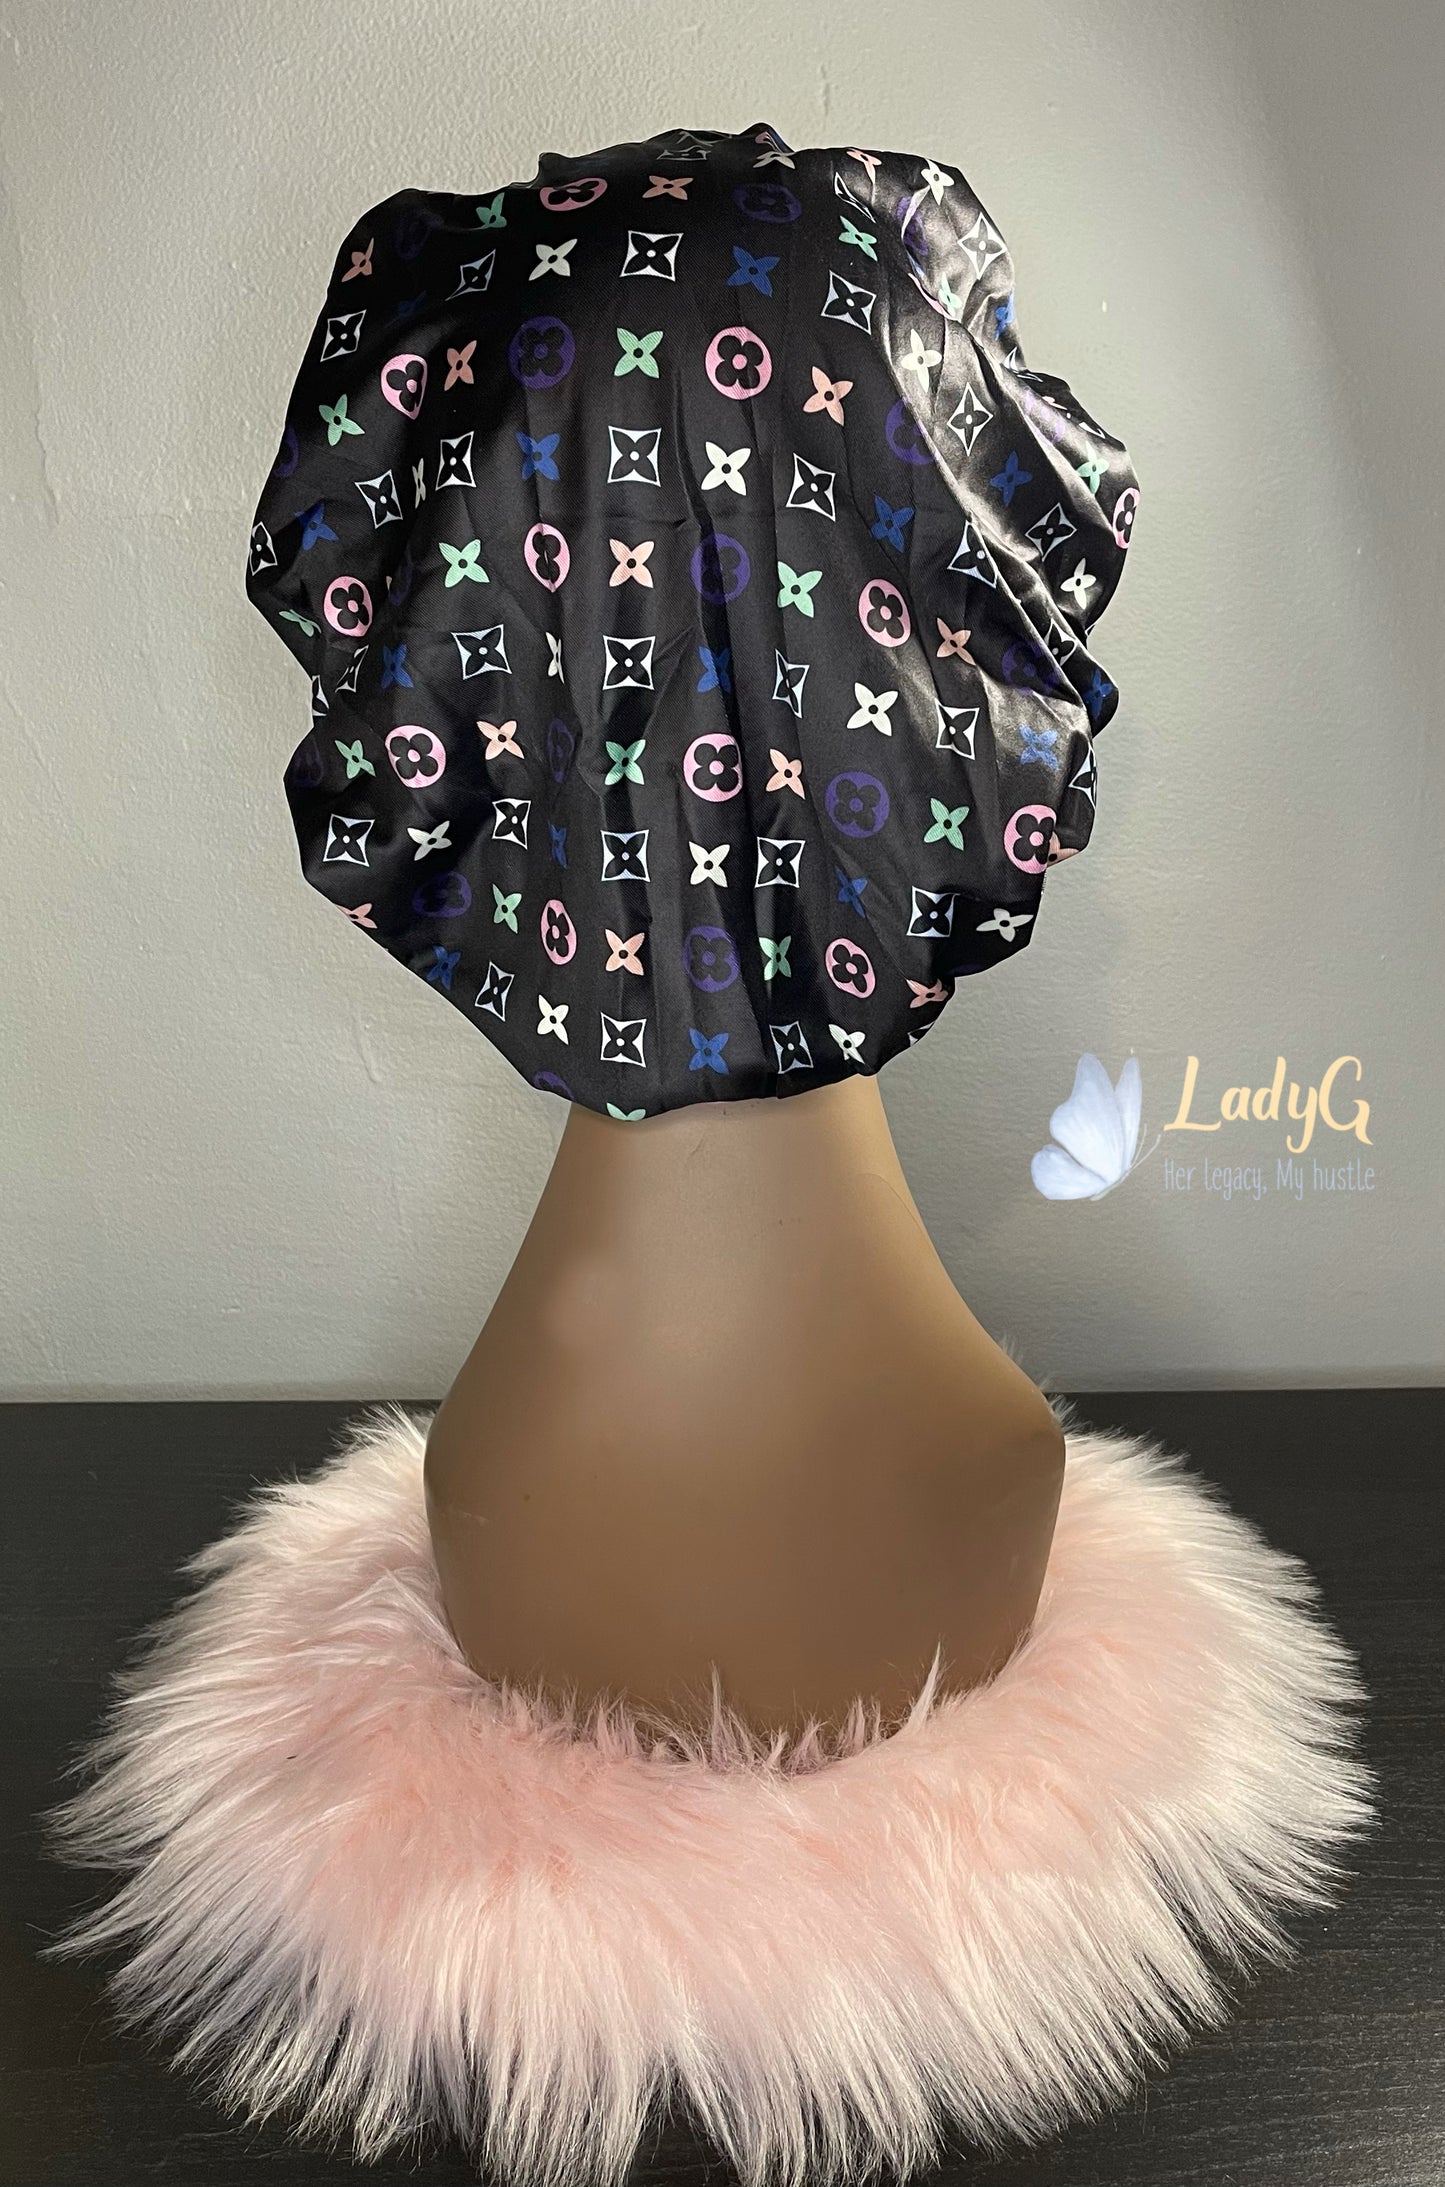 PINK & RED LV INSPIRED BONNET – THE RAG LADY